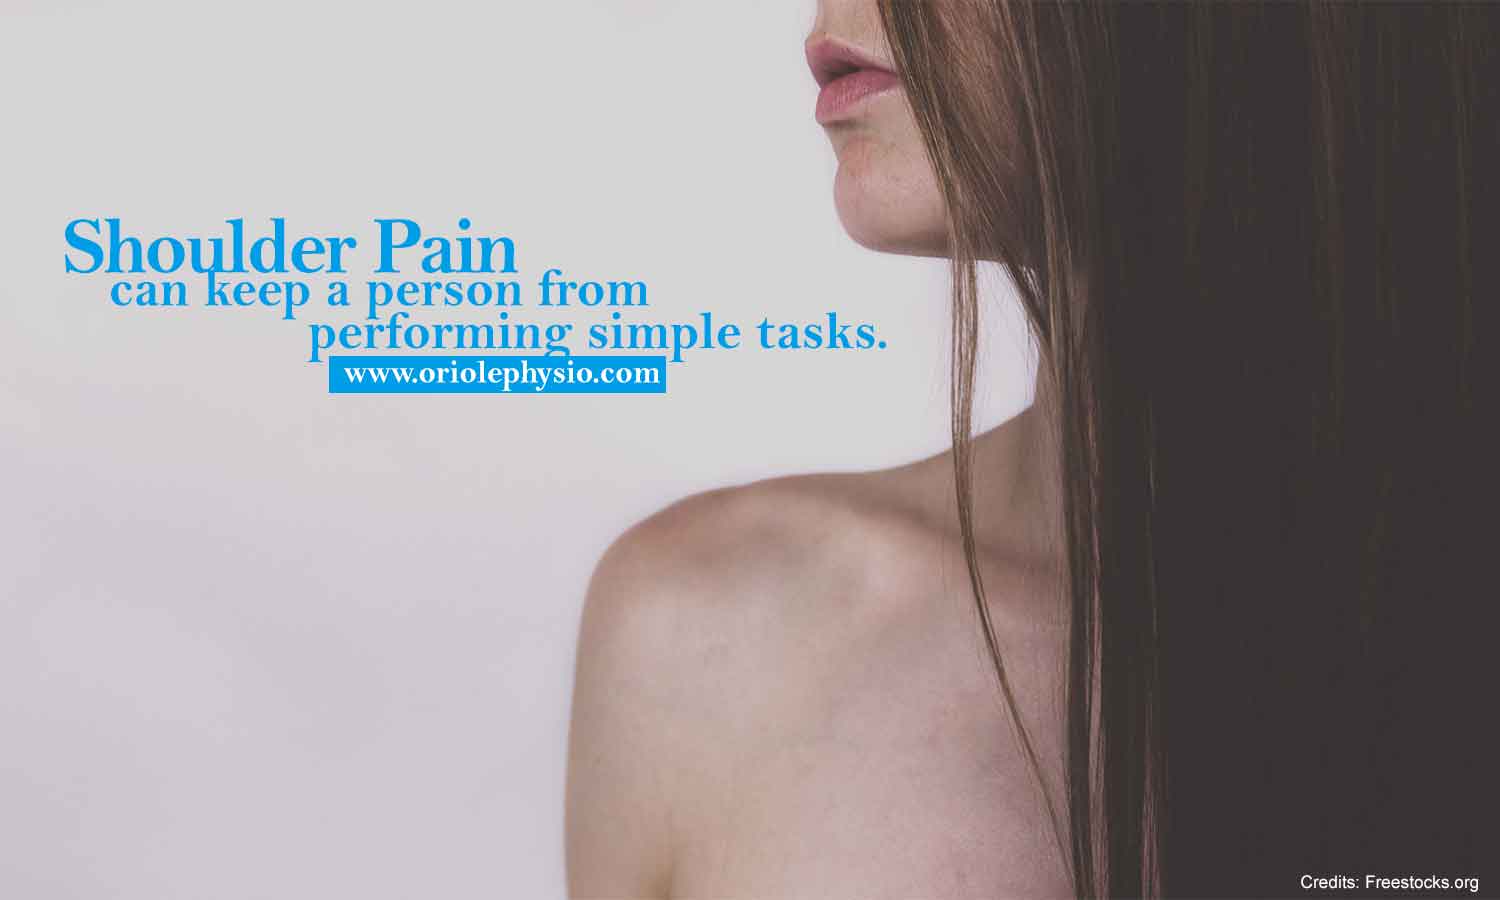 Shoulder pain can keep a person from performing simple tasks.